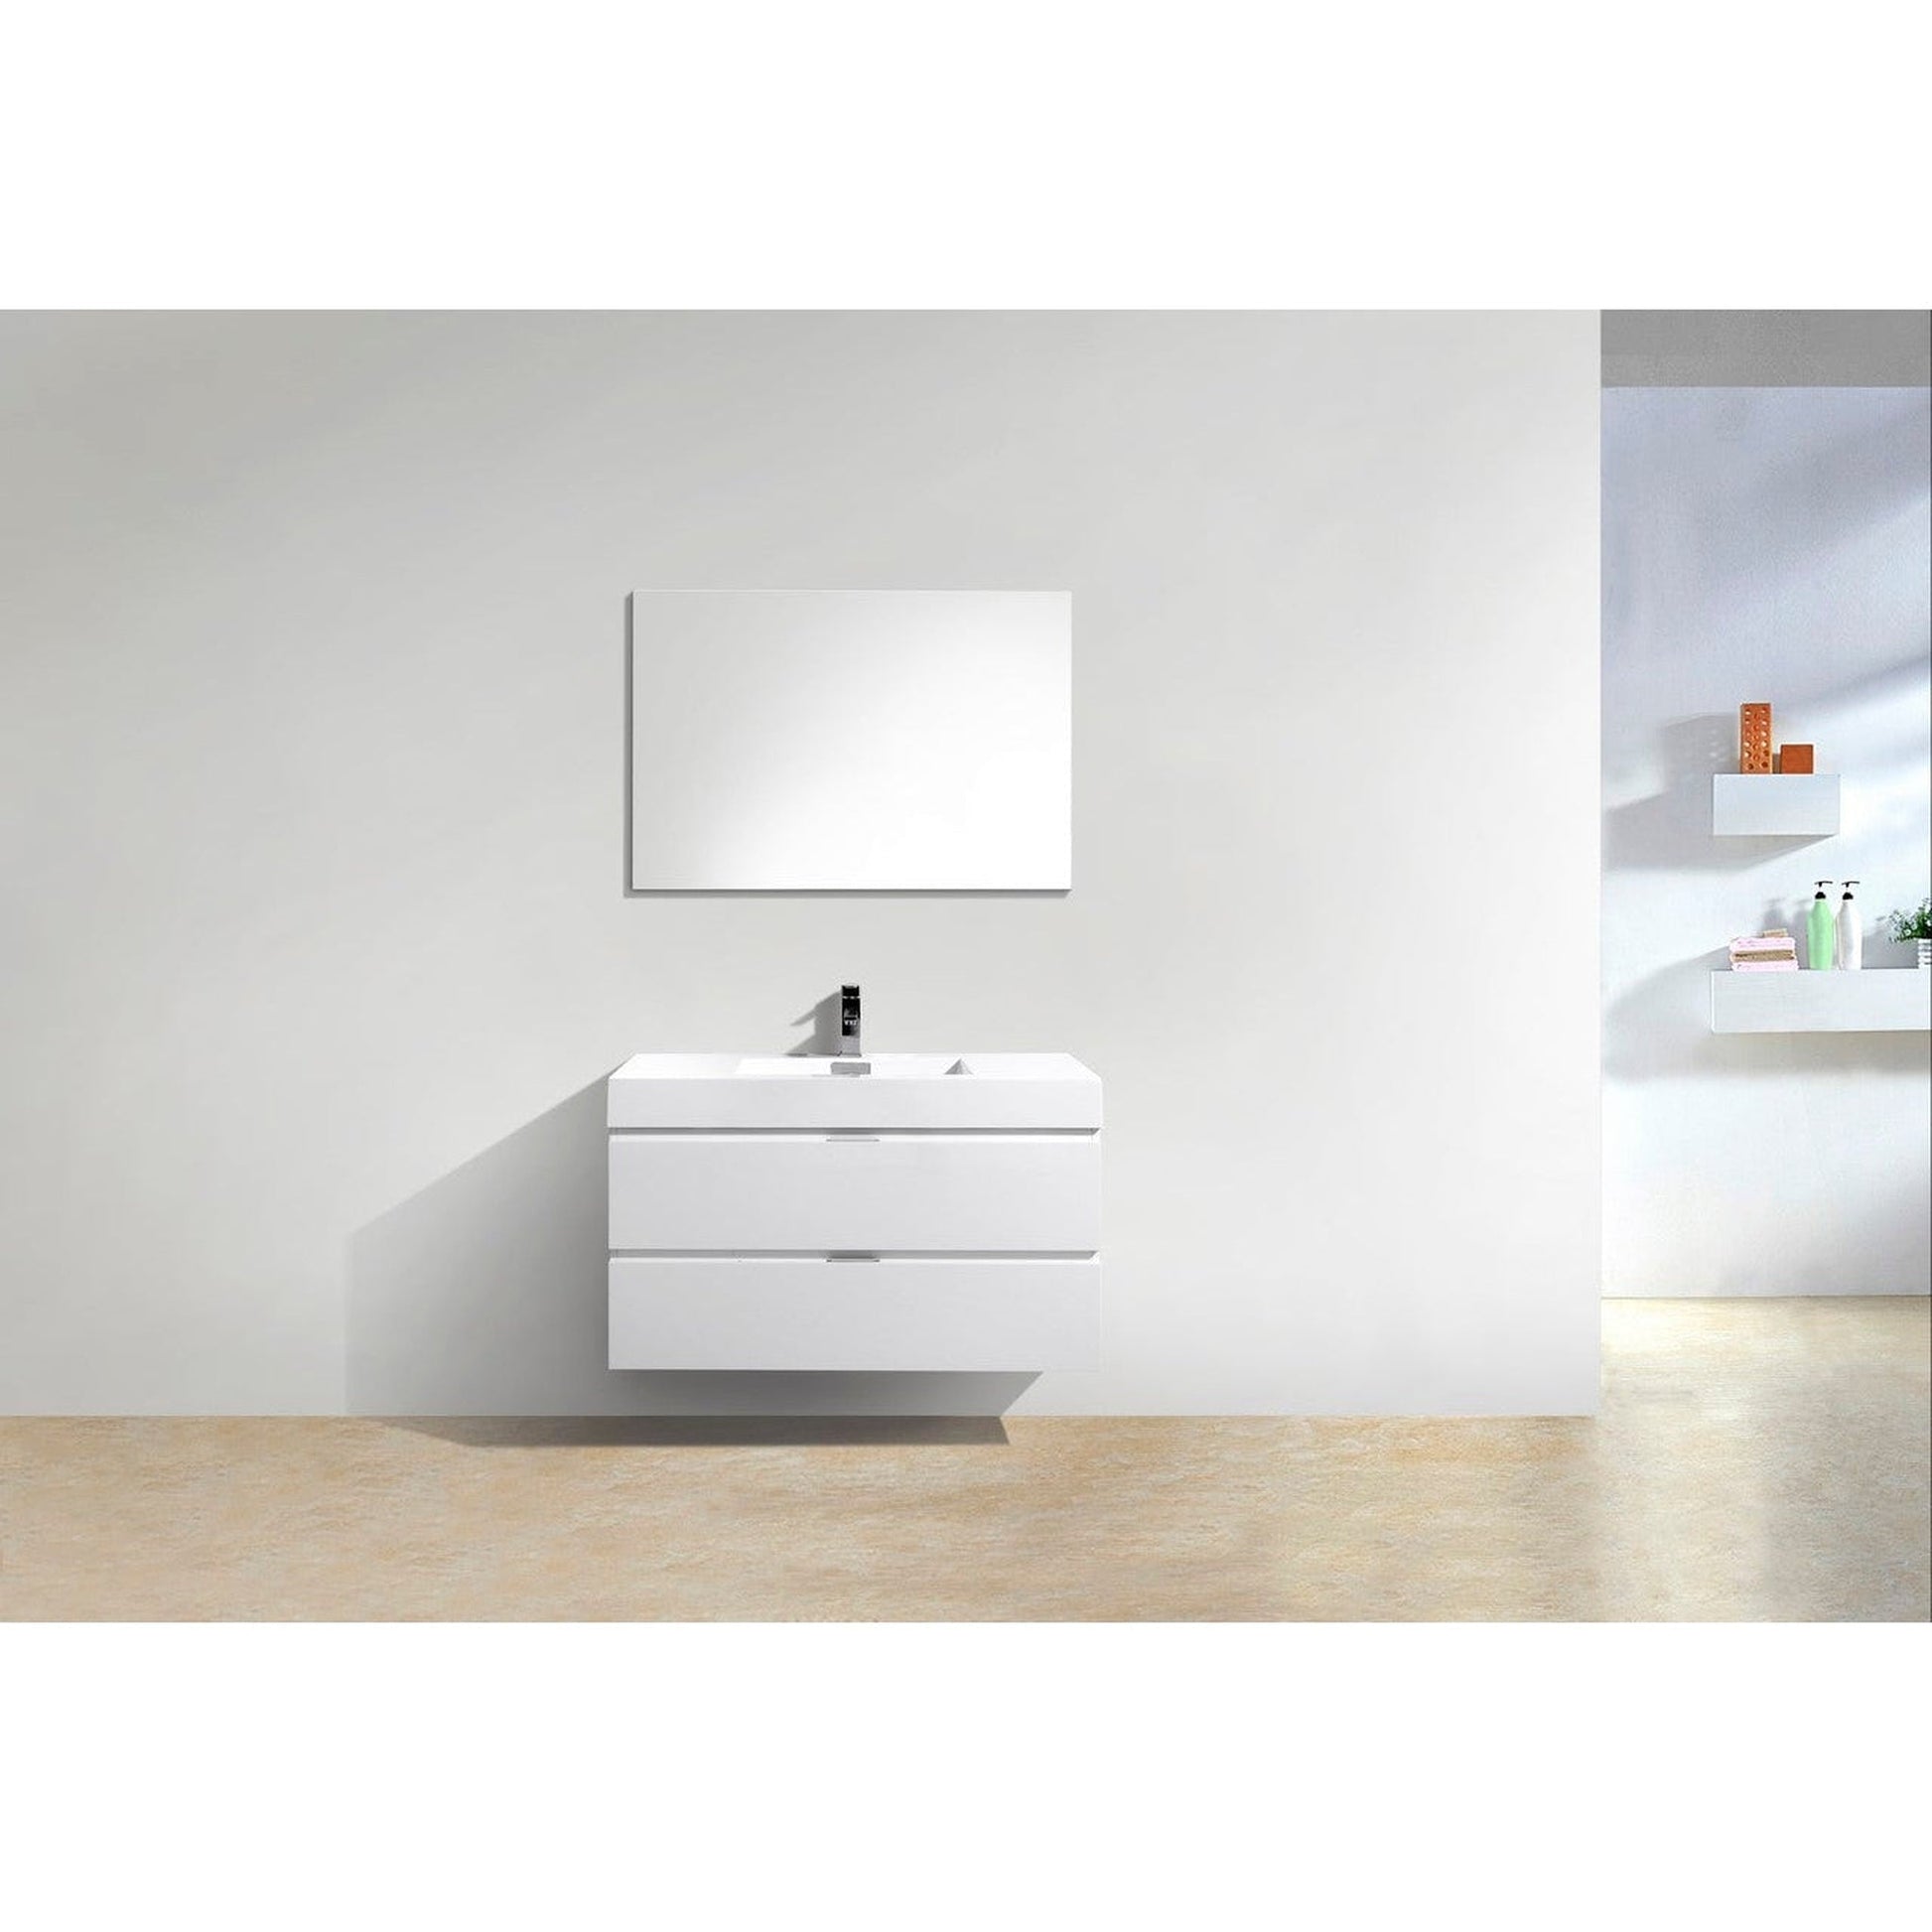 KubeBath Bliss 40" High Gloss White Wall-Mounted Modern Bathroom Vanity With Single Integrated Acrylic Sink With Overflow and 36" White Framed Mirror With Shelf